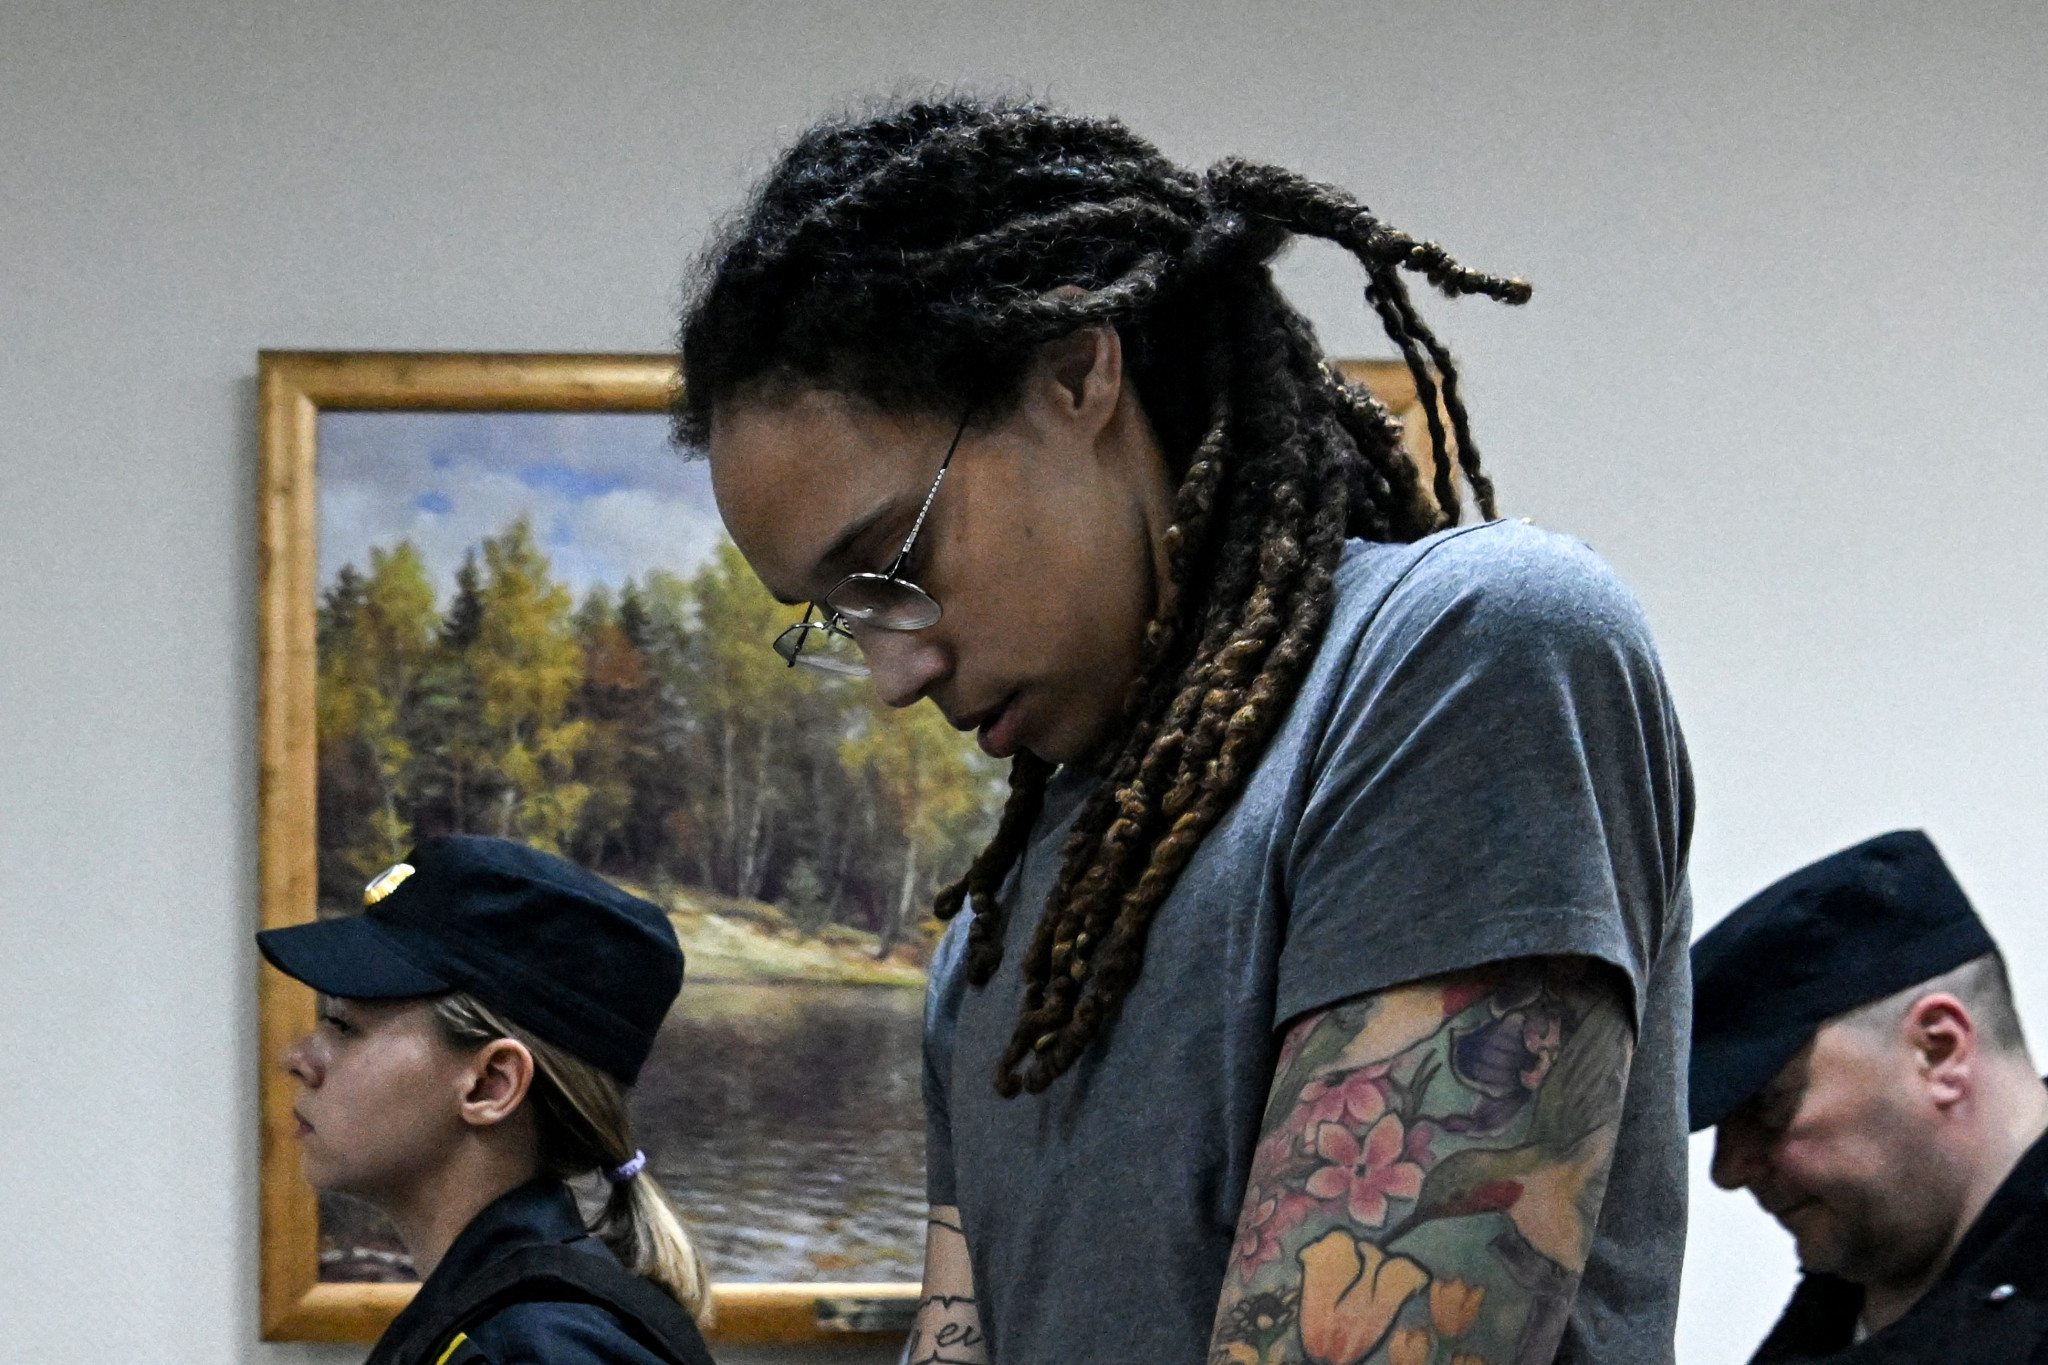 US Embassy officials in Moscow visit imprisoned basketball star Griner